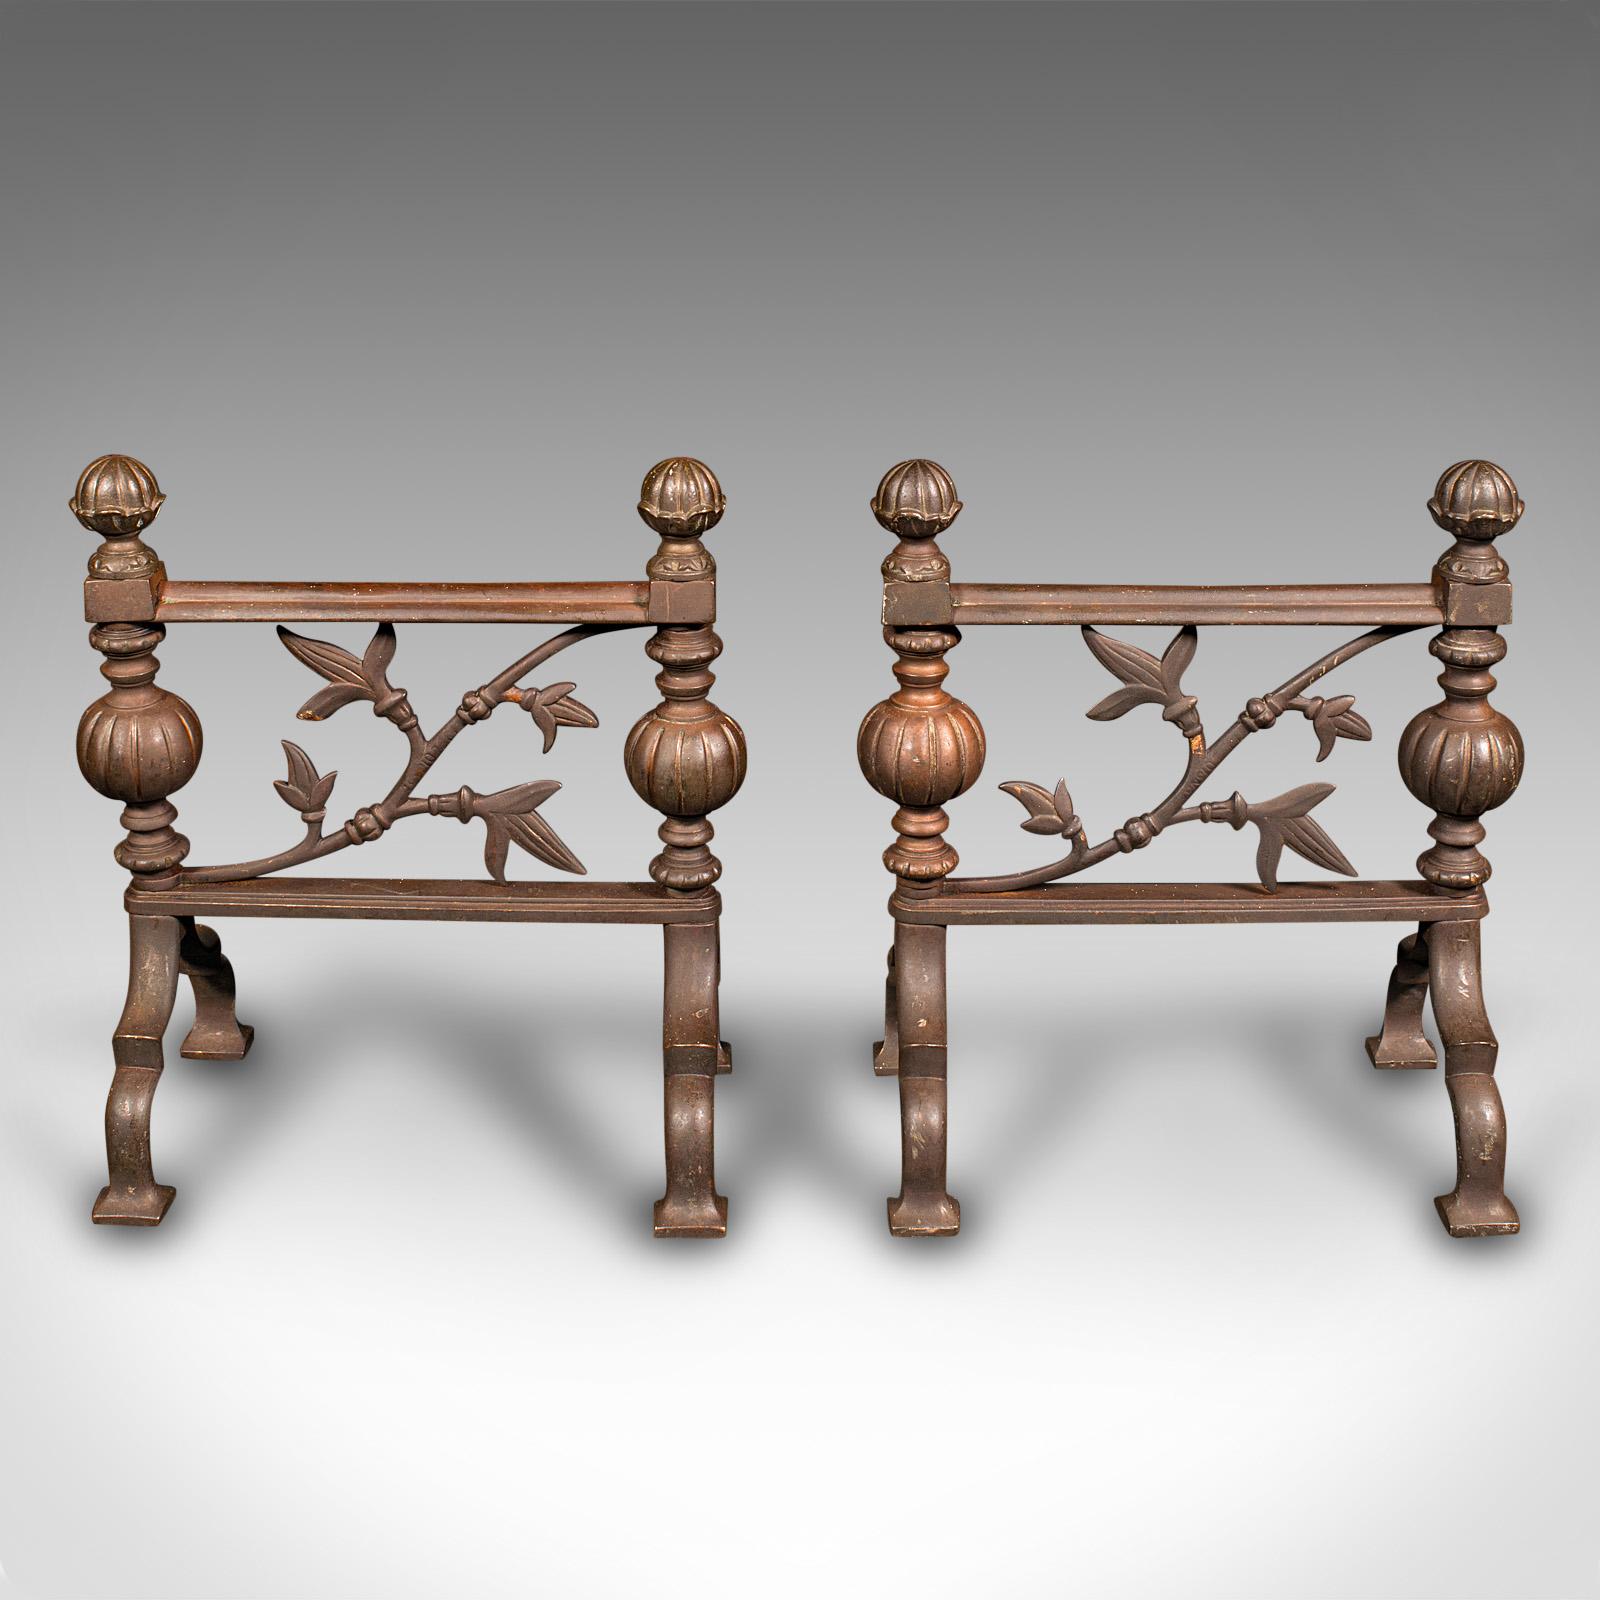 This is a pair of antique fireside tool rests. An English, bronze decorative fireplace accessory in Aesthetic period taste, dating to the late Victorian era, circa 1890.

Wonderfully decorative rests, adding a dash to the fireplace
Displaying a